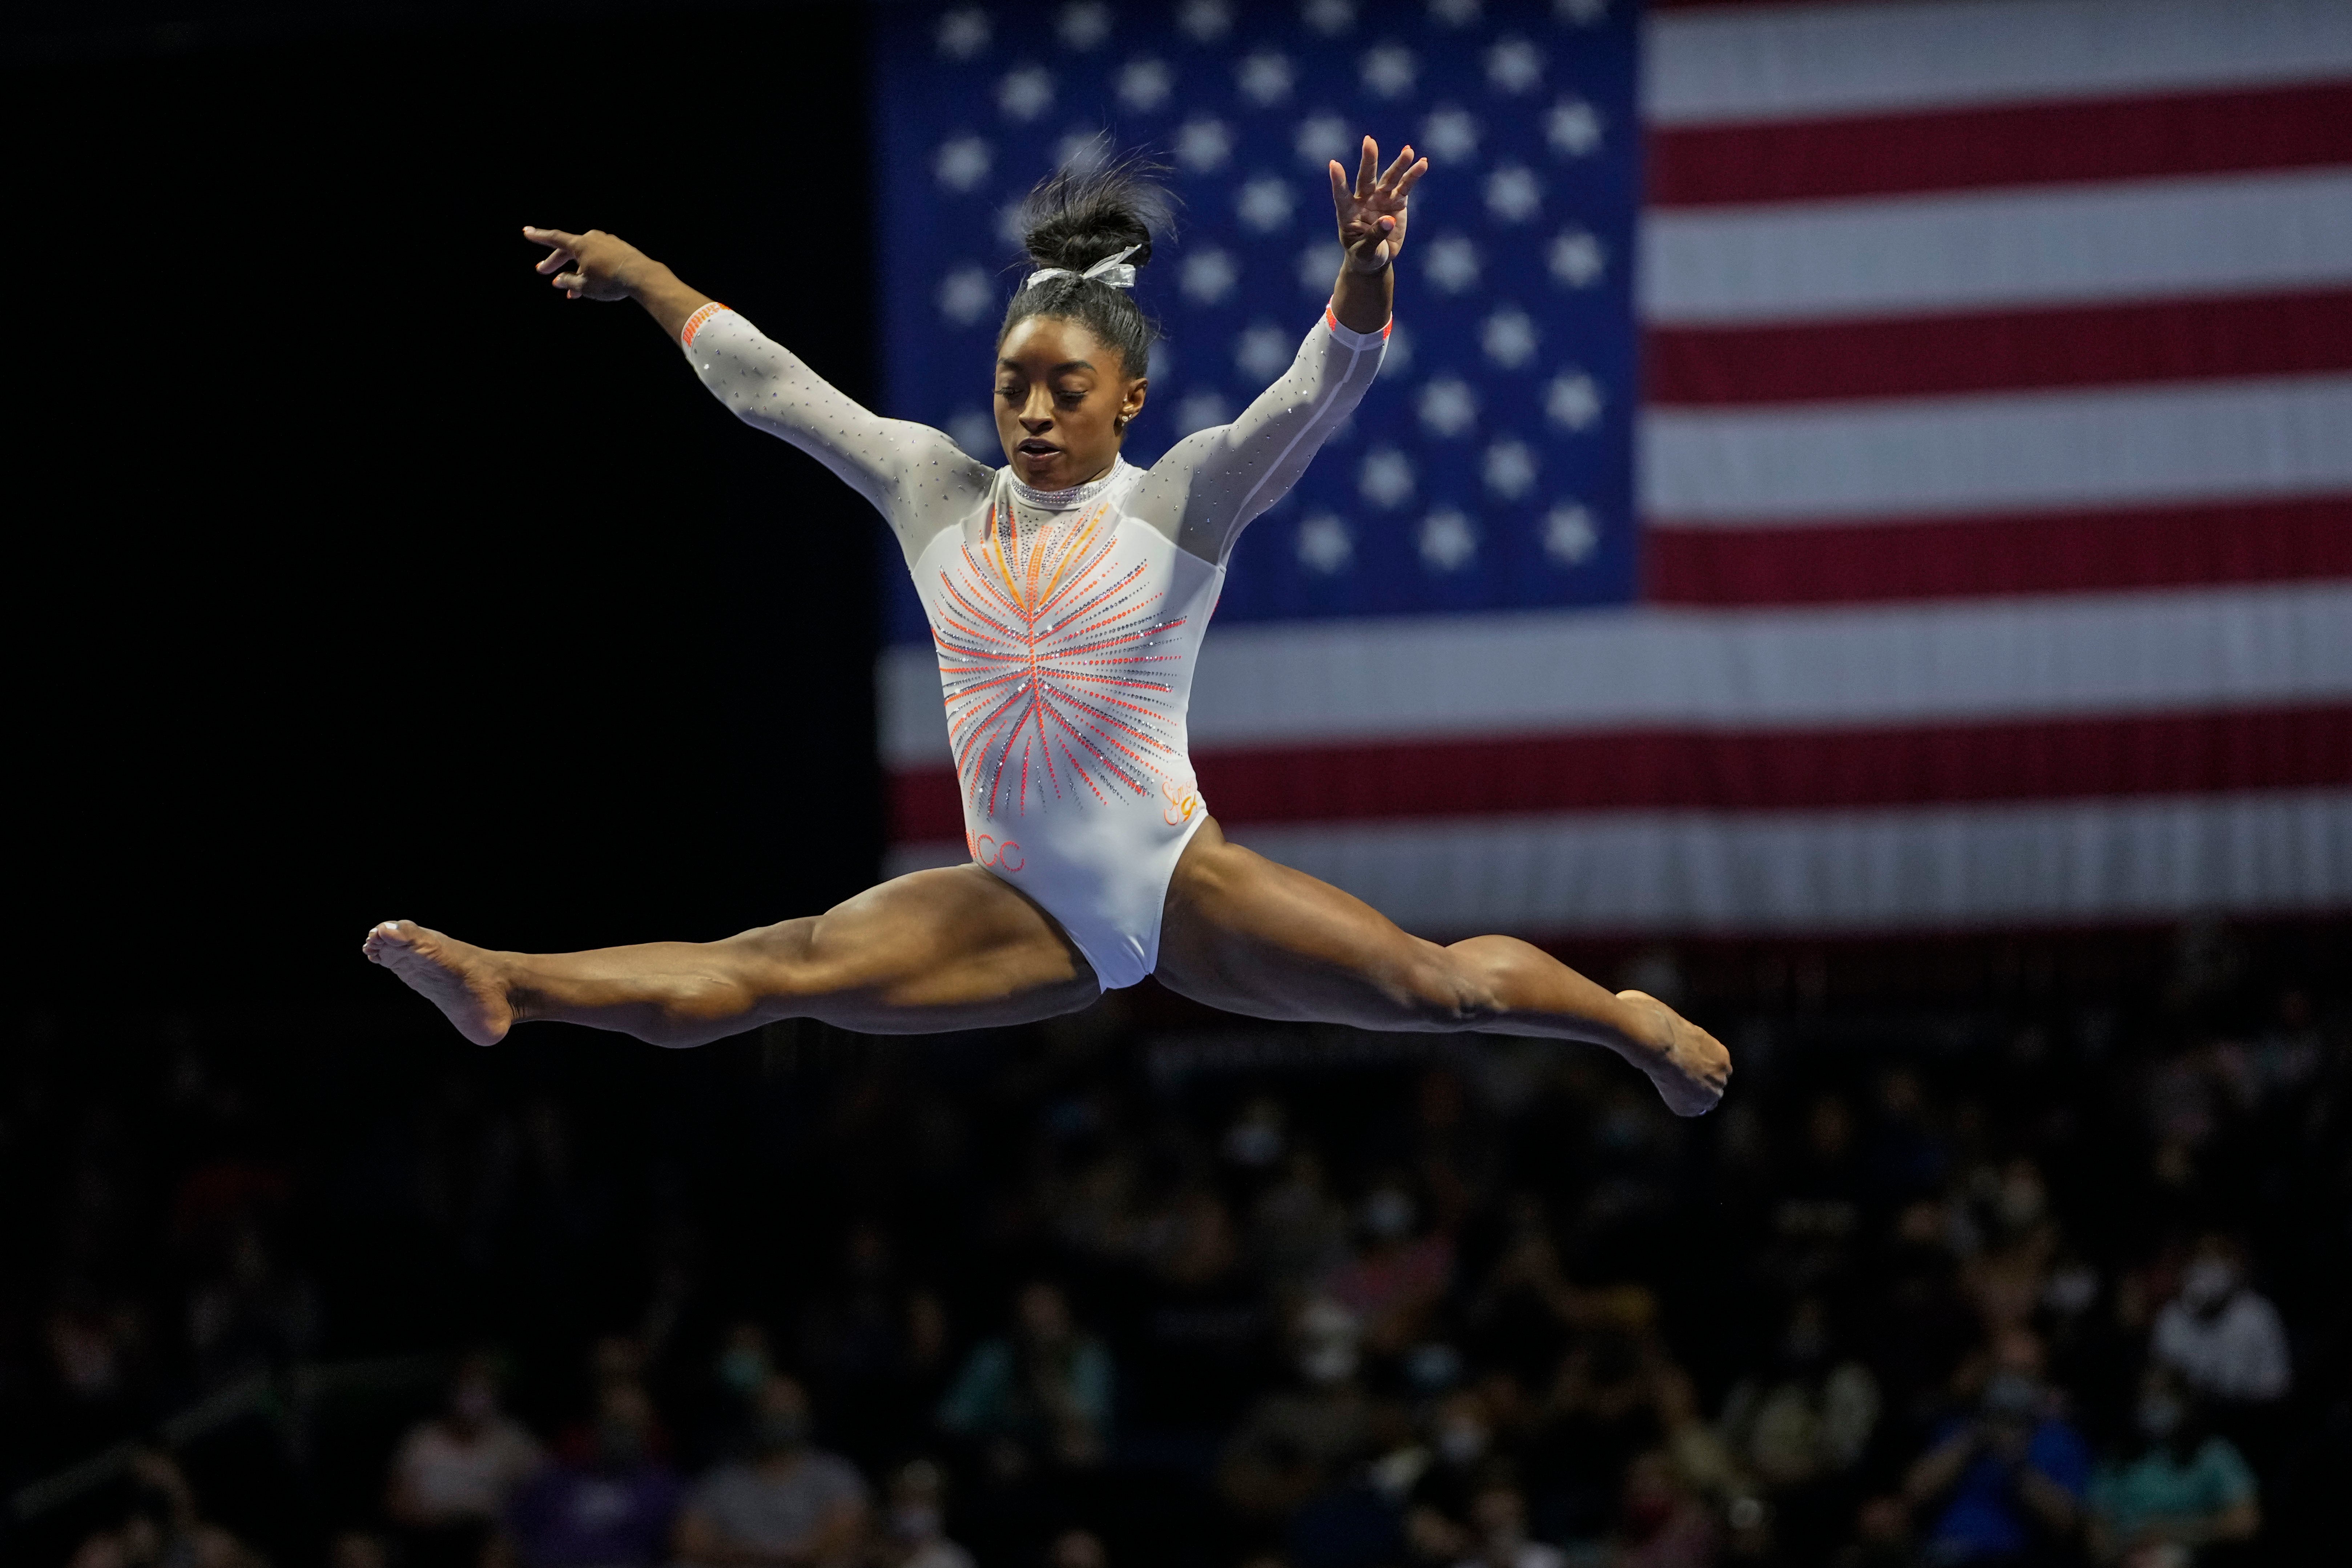 Simone Biles Made A Huge Statement With Her Latest Leotard The Independent